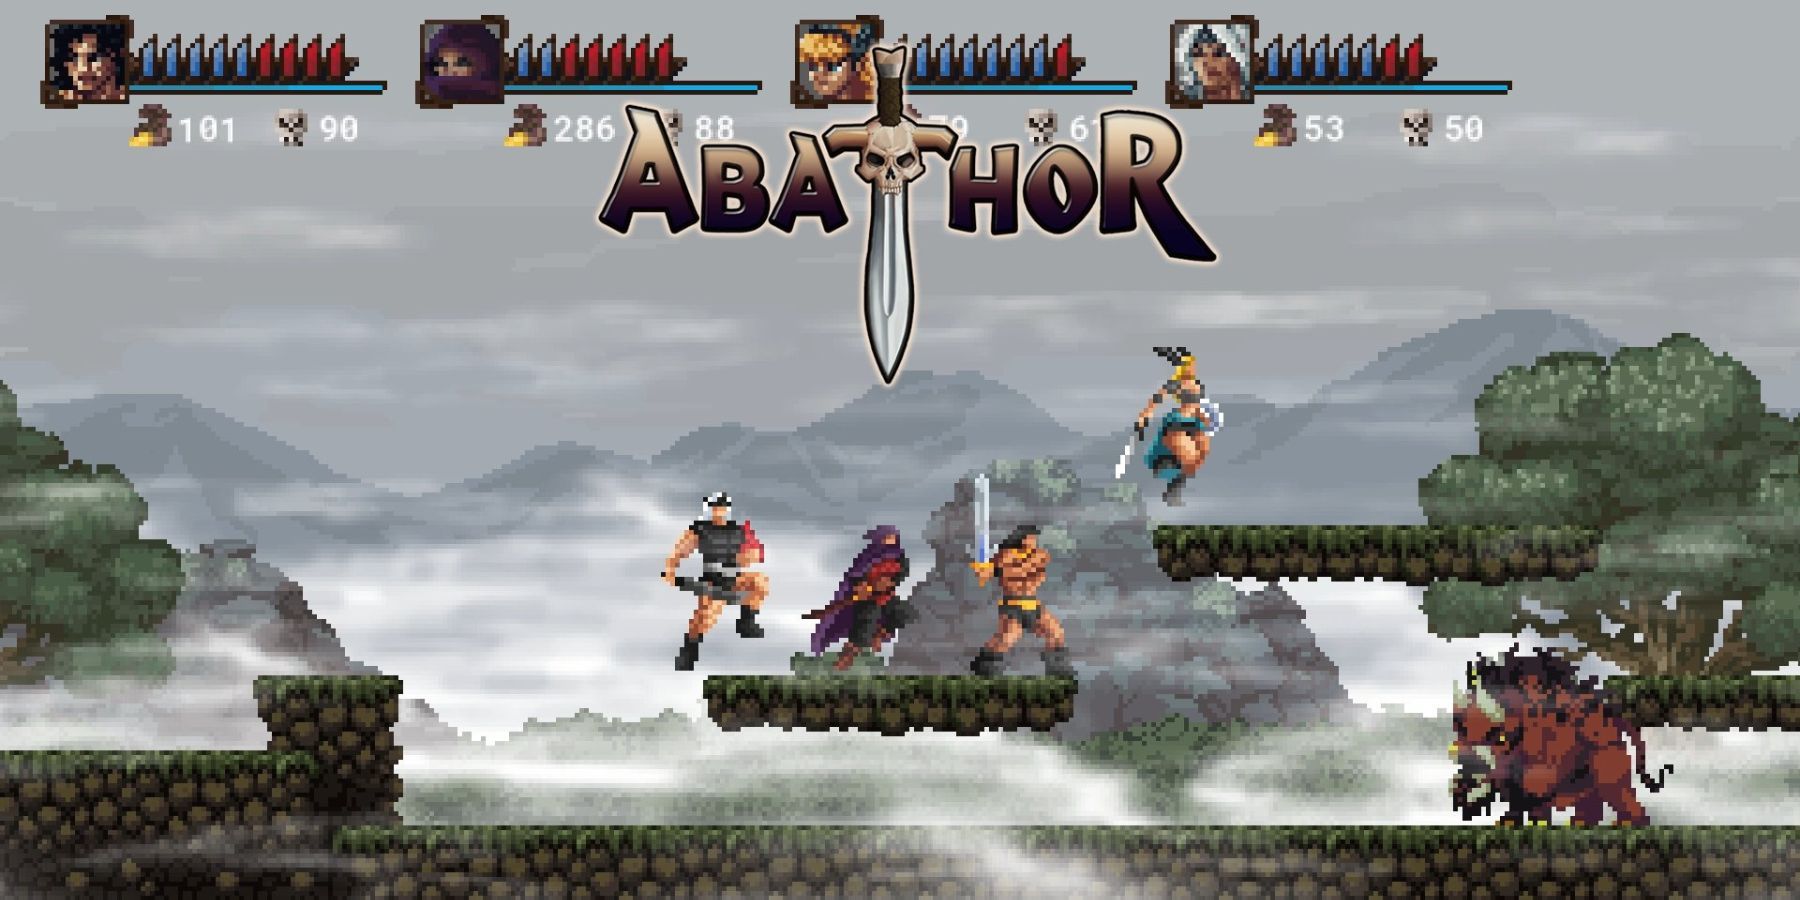 Abathor heroes are fighting a boar monster in the misty forest